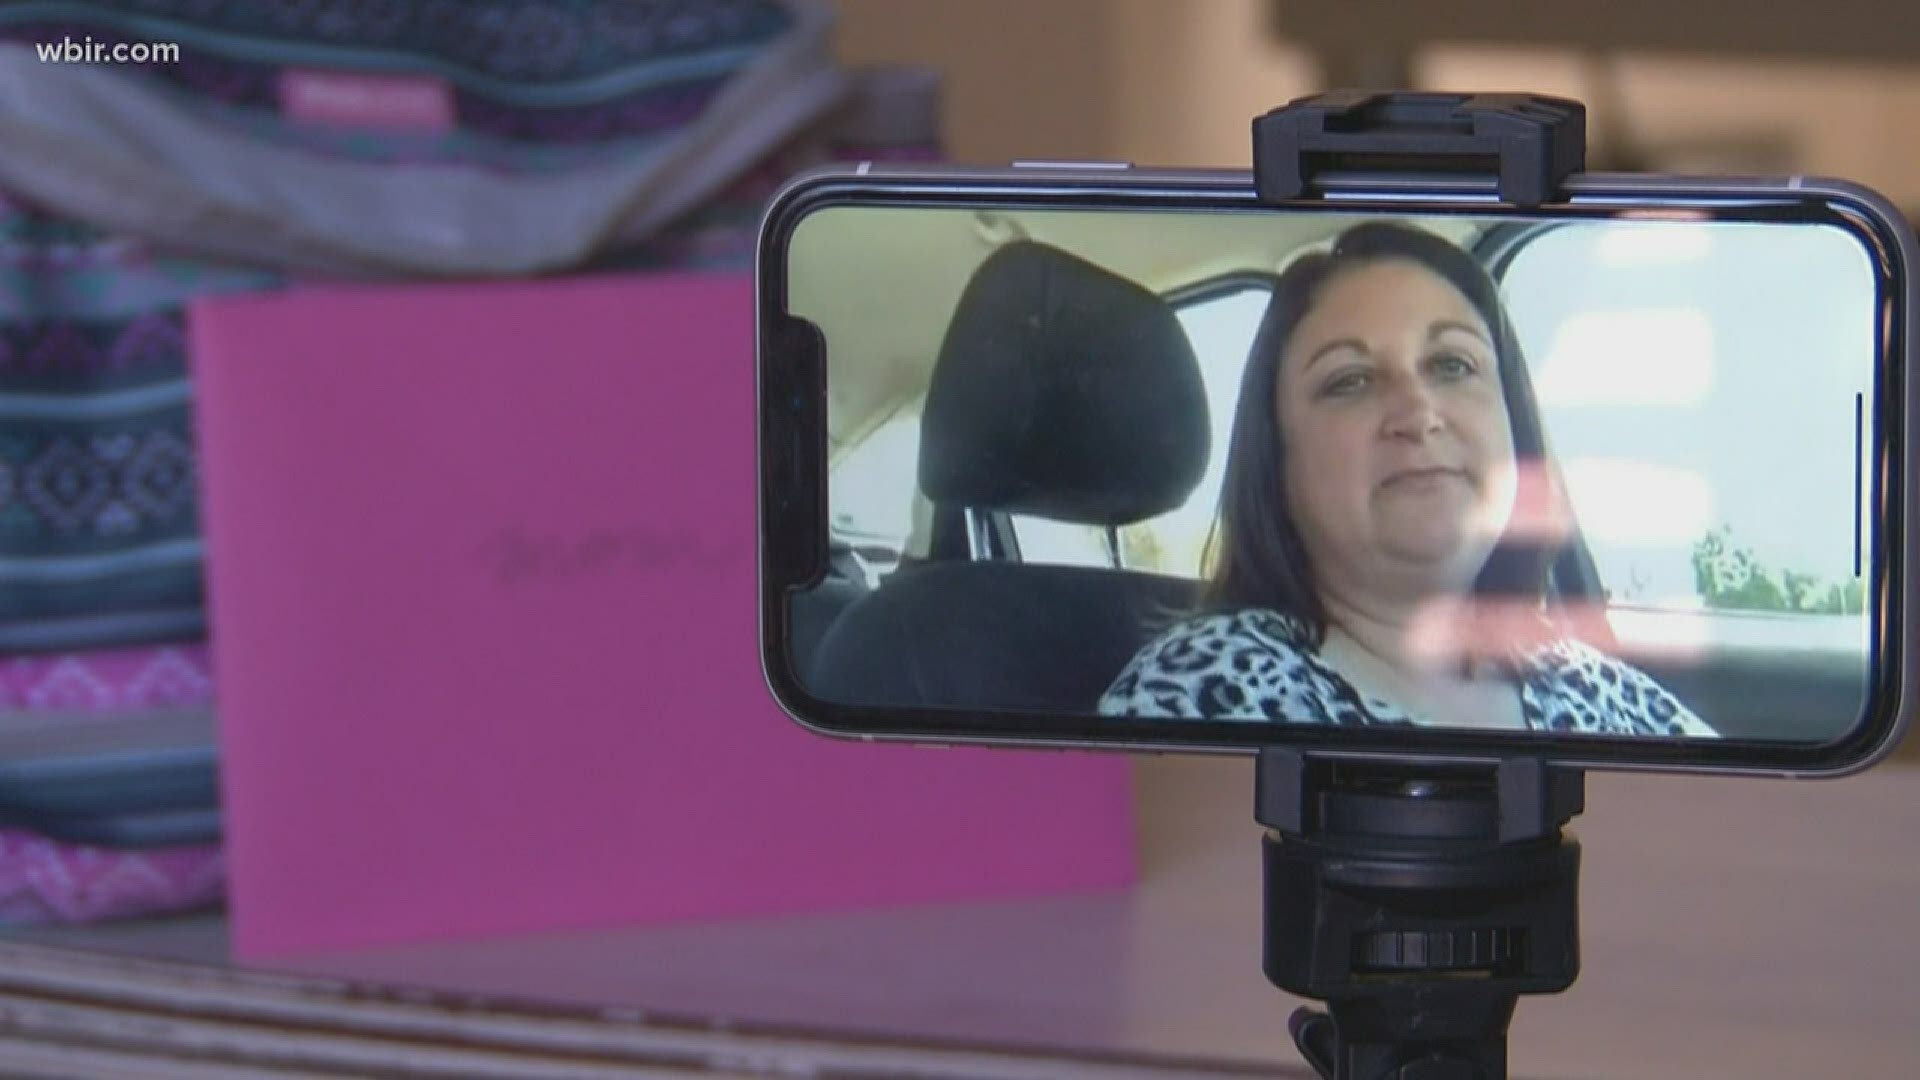 10News reporter Katie Inman introduces us to a breast cancer survivor who does it all.